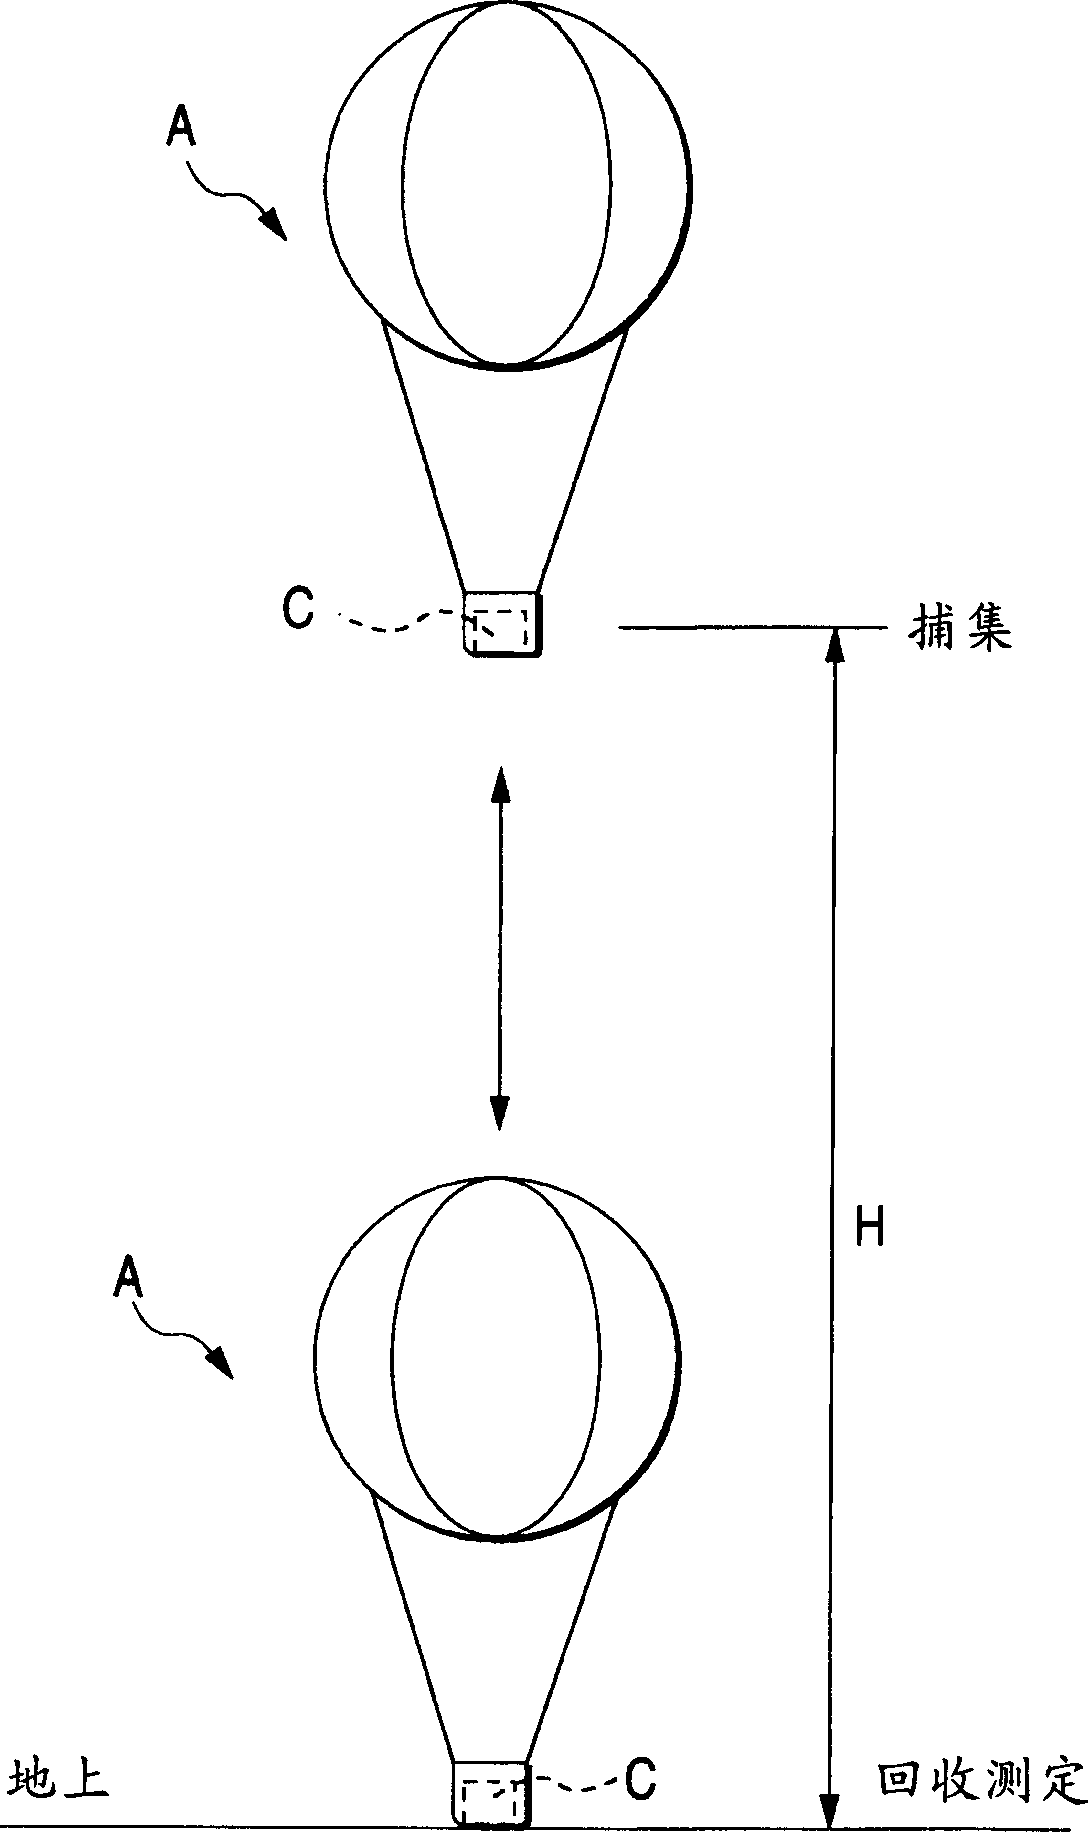 Method for measuring suspension particles in air